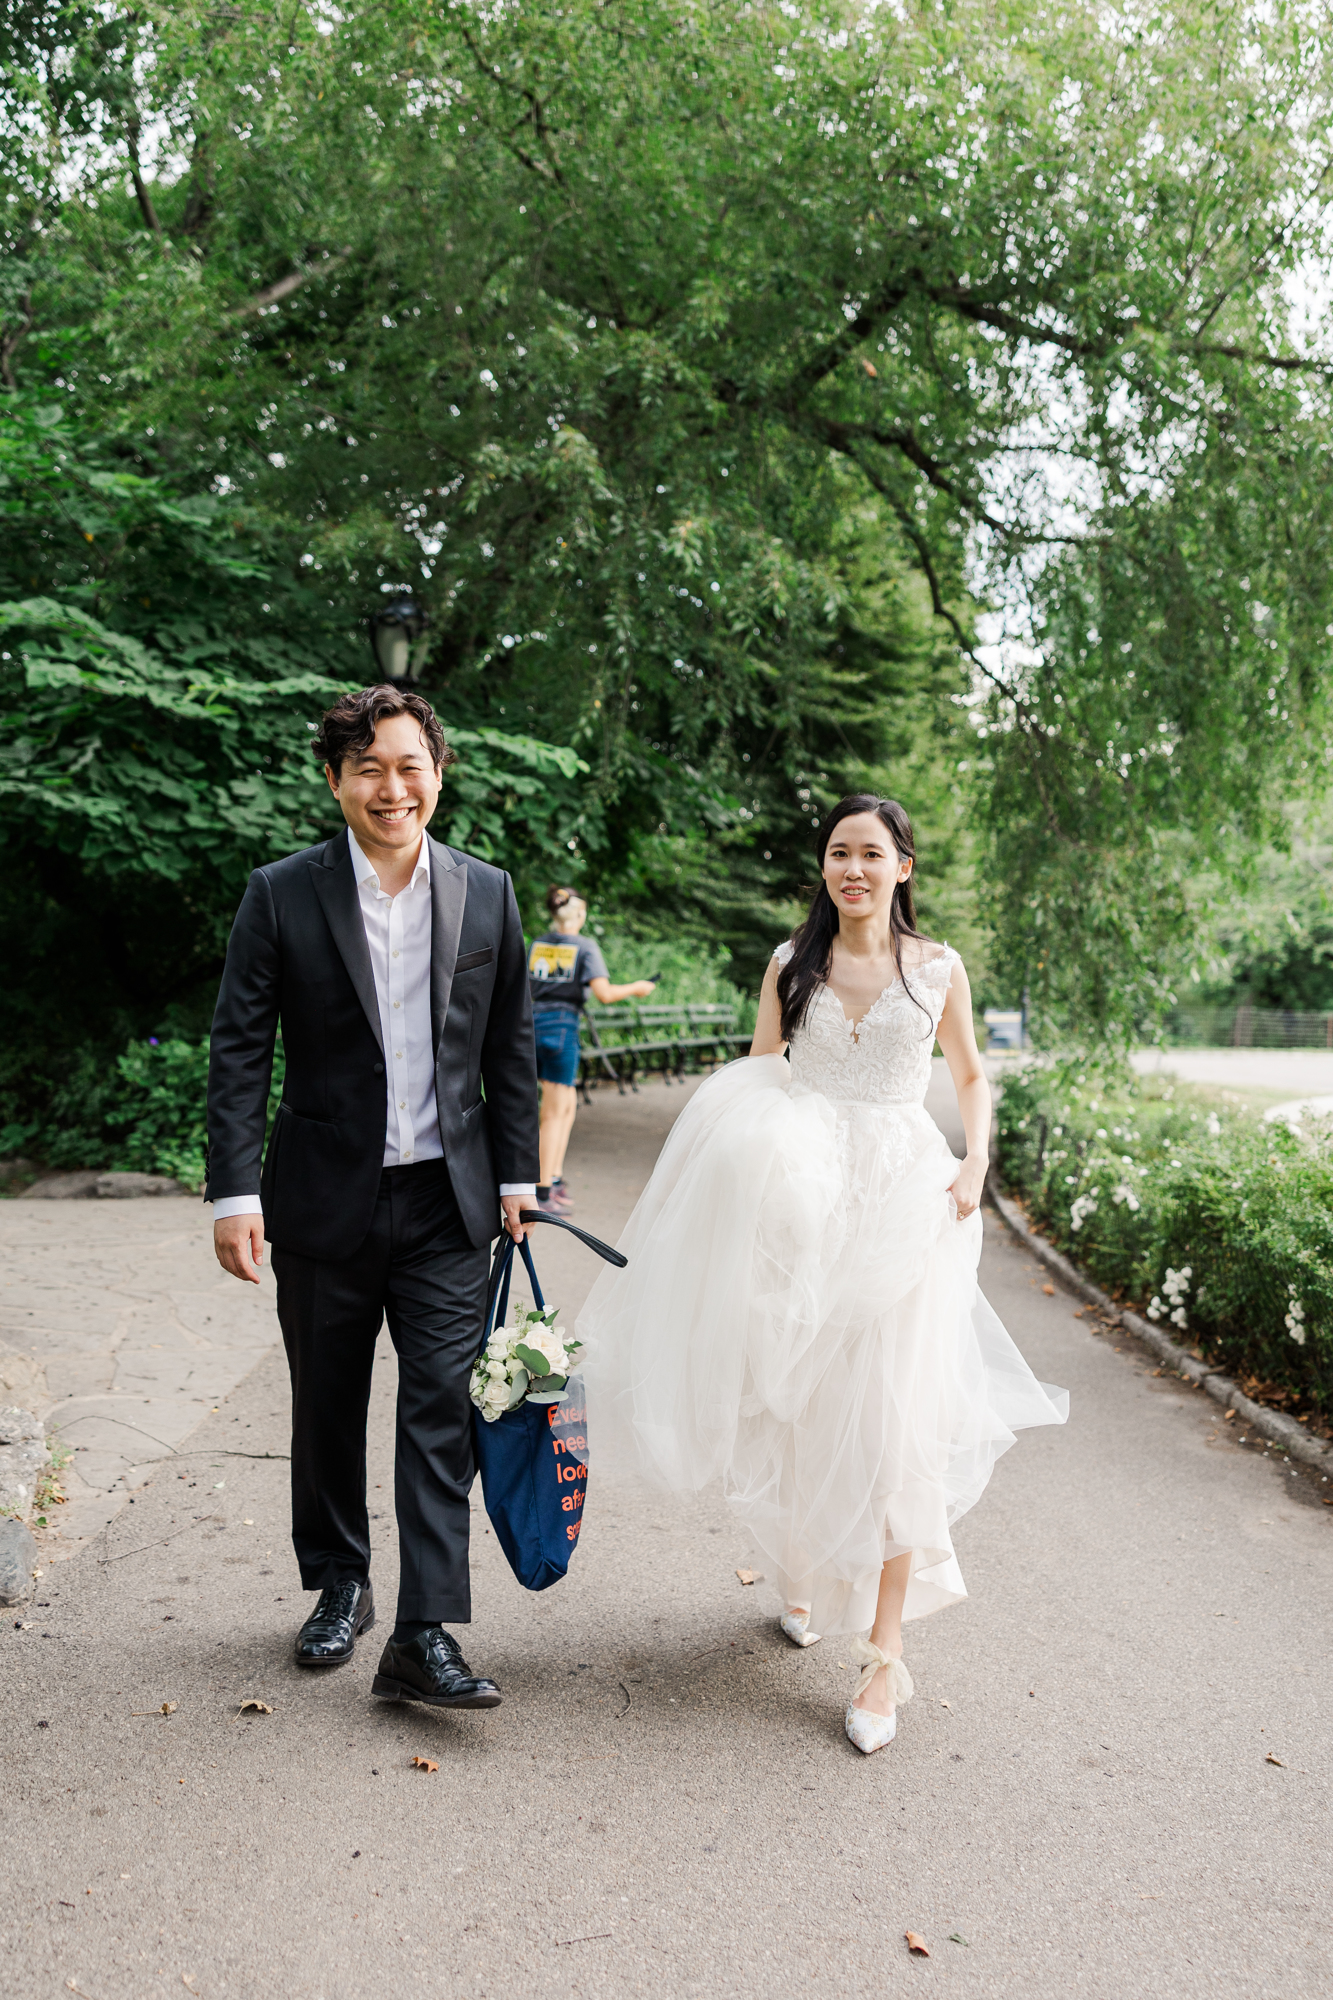 Memorable Summer Morning Elopement Photos in Central Park New York